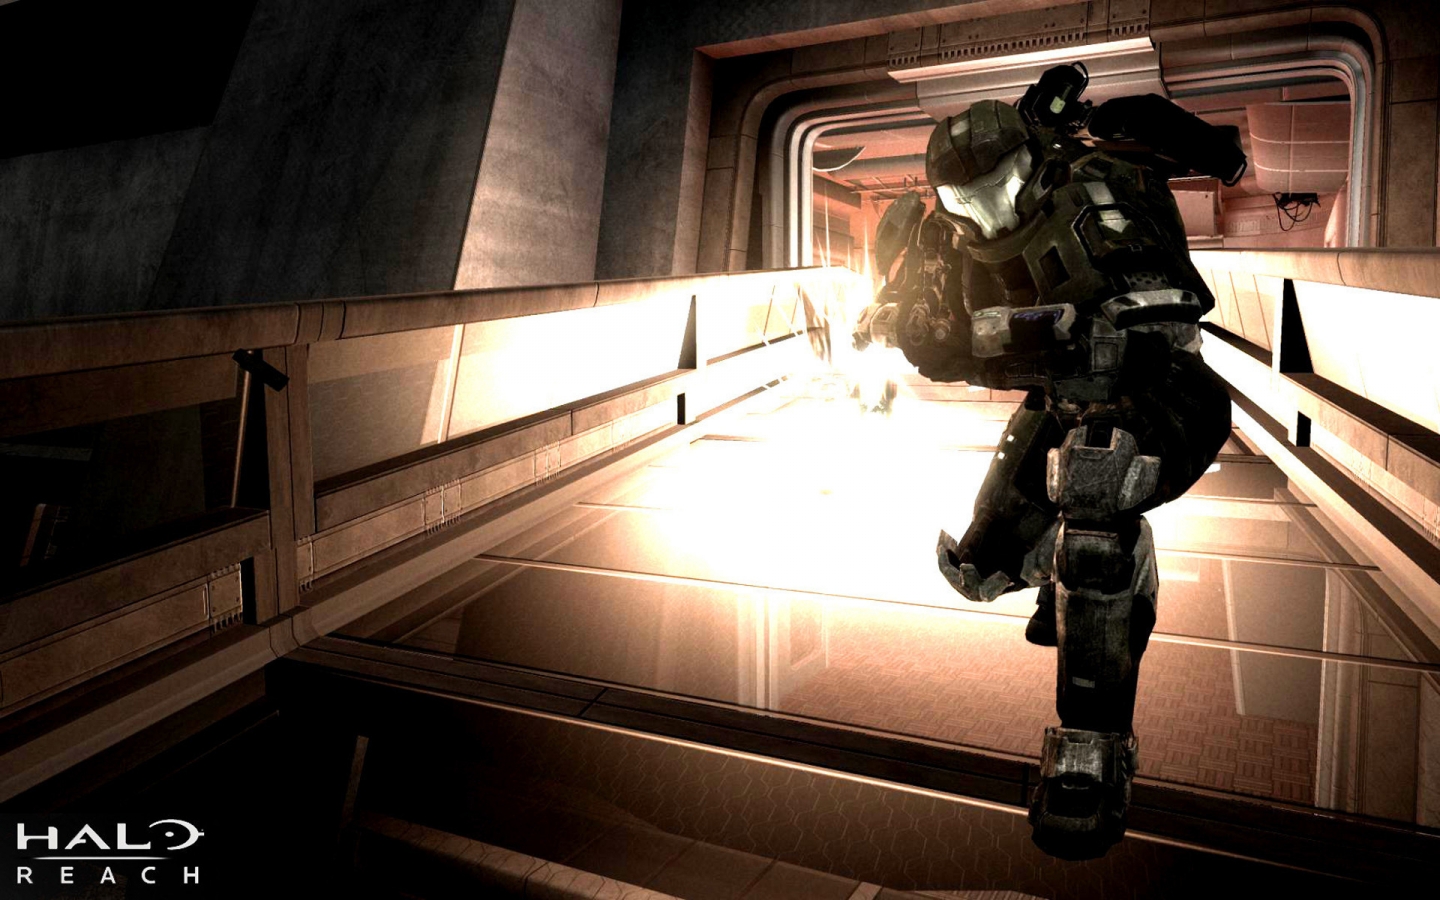 Halo Reach Character for 1440 x 900 widescreen resolution